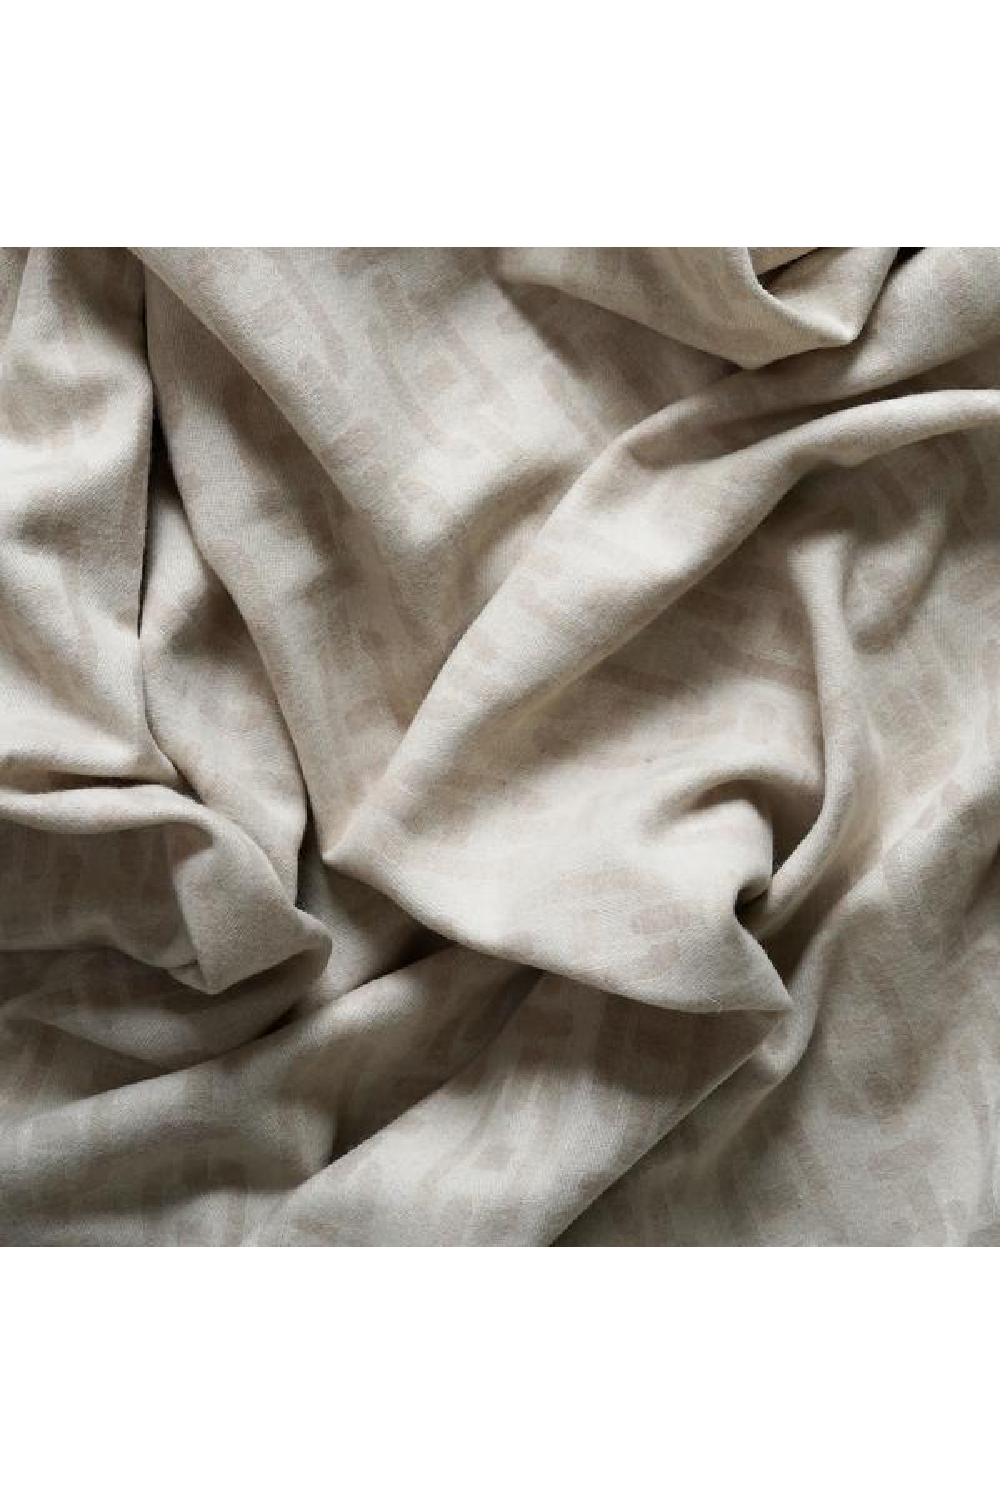 Wool and Cashmere Chainlink Throw | Andrew Martin Burlington | OROA